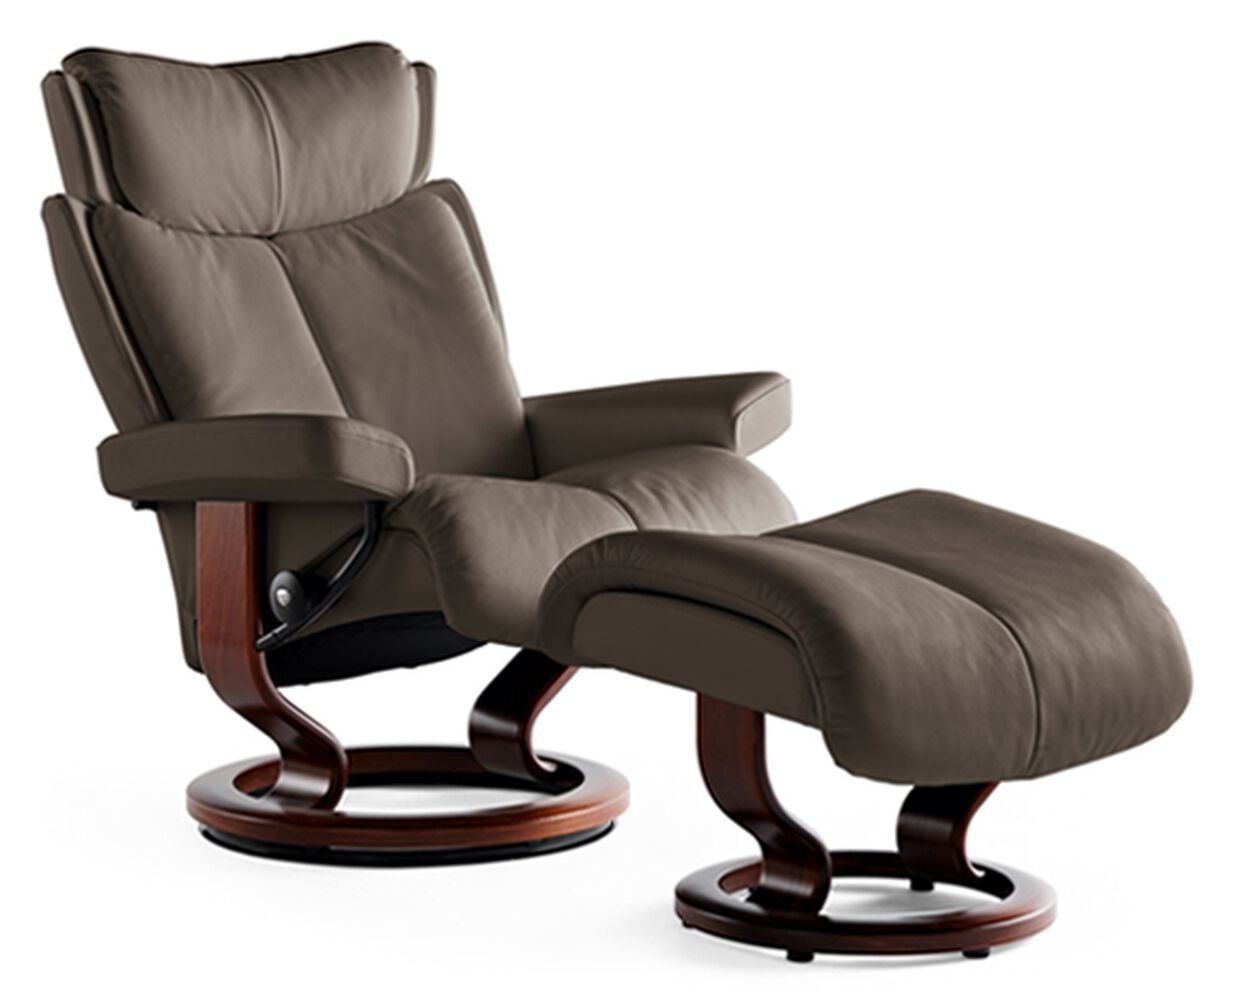 Recliners contemporary style